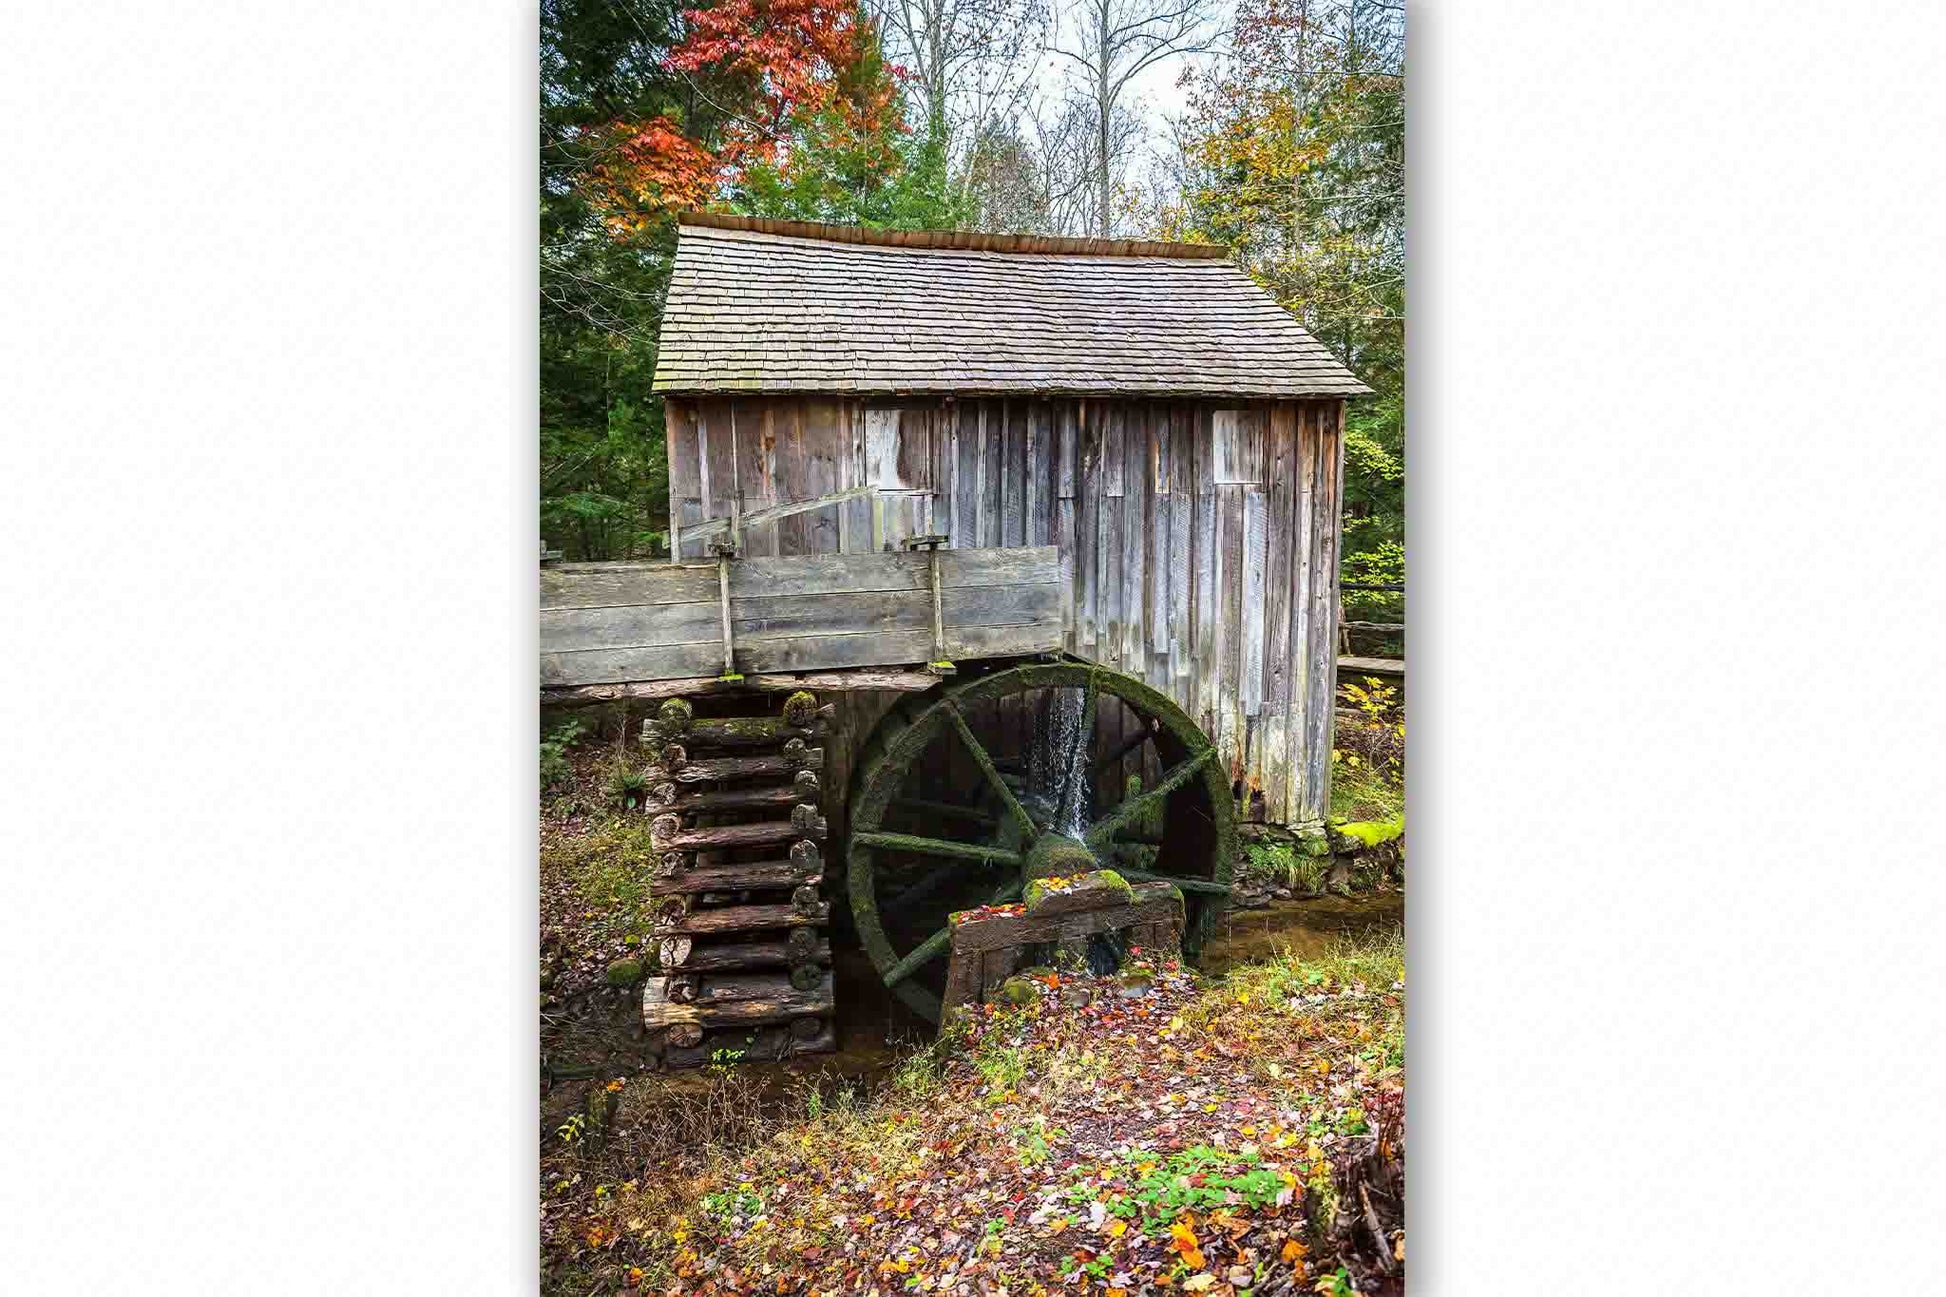 Vertical country photography print of the old John Cable saw mill on an autumn day in the Great Smoky Mountains of Tennessee by Sean Ramsey of Southern Plains Photography.